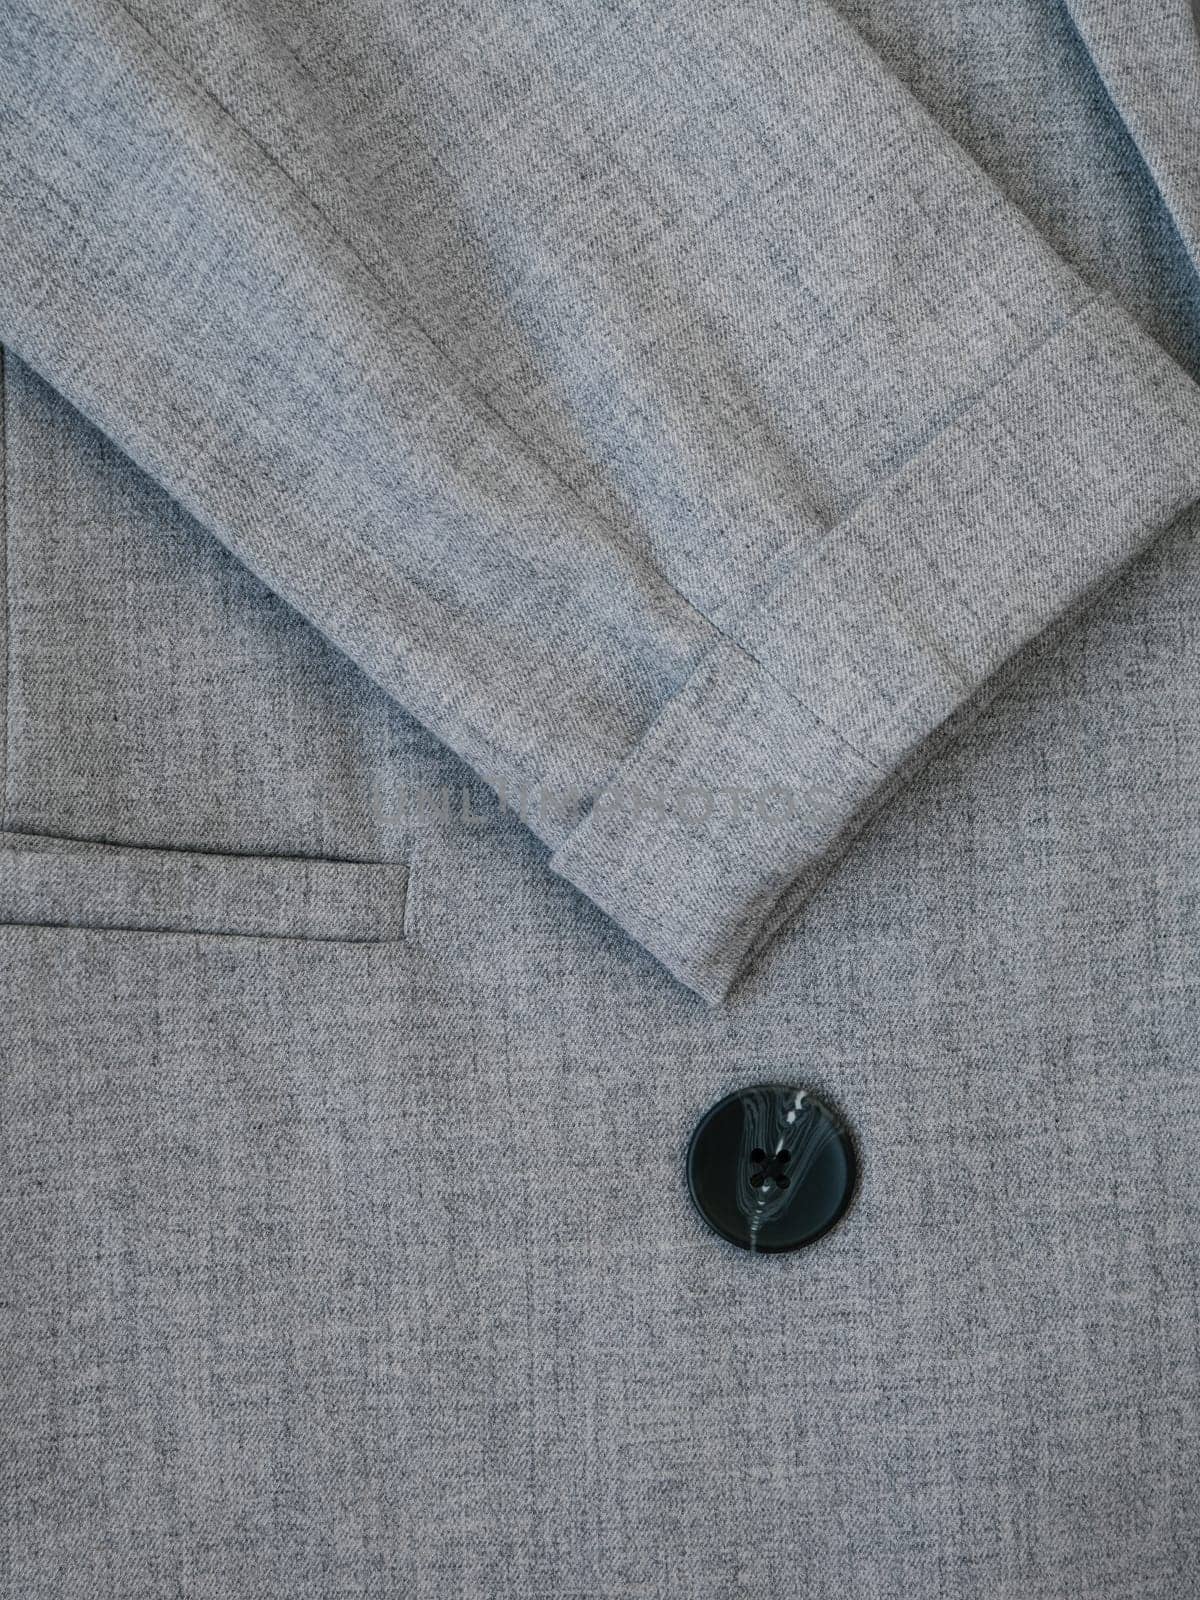 Texture of wool business jacket or coat. Grey women suit jacket with closeup buttons. Business or formal wear. Gray fabric for tailoring. The grey pinstripe suit cloth.